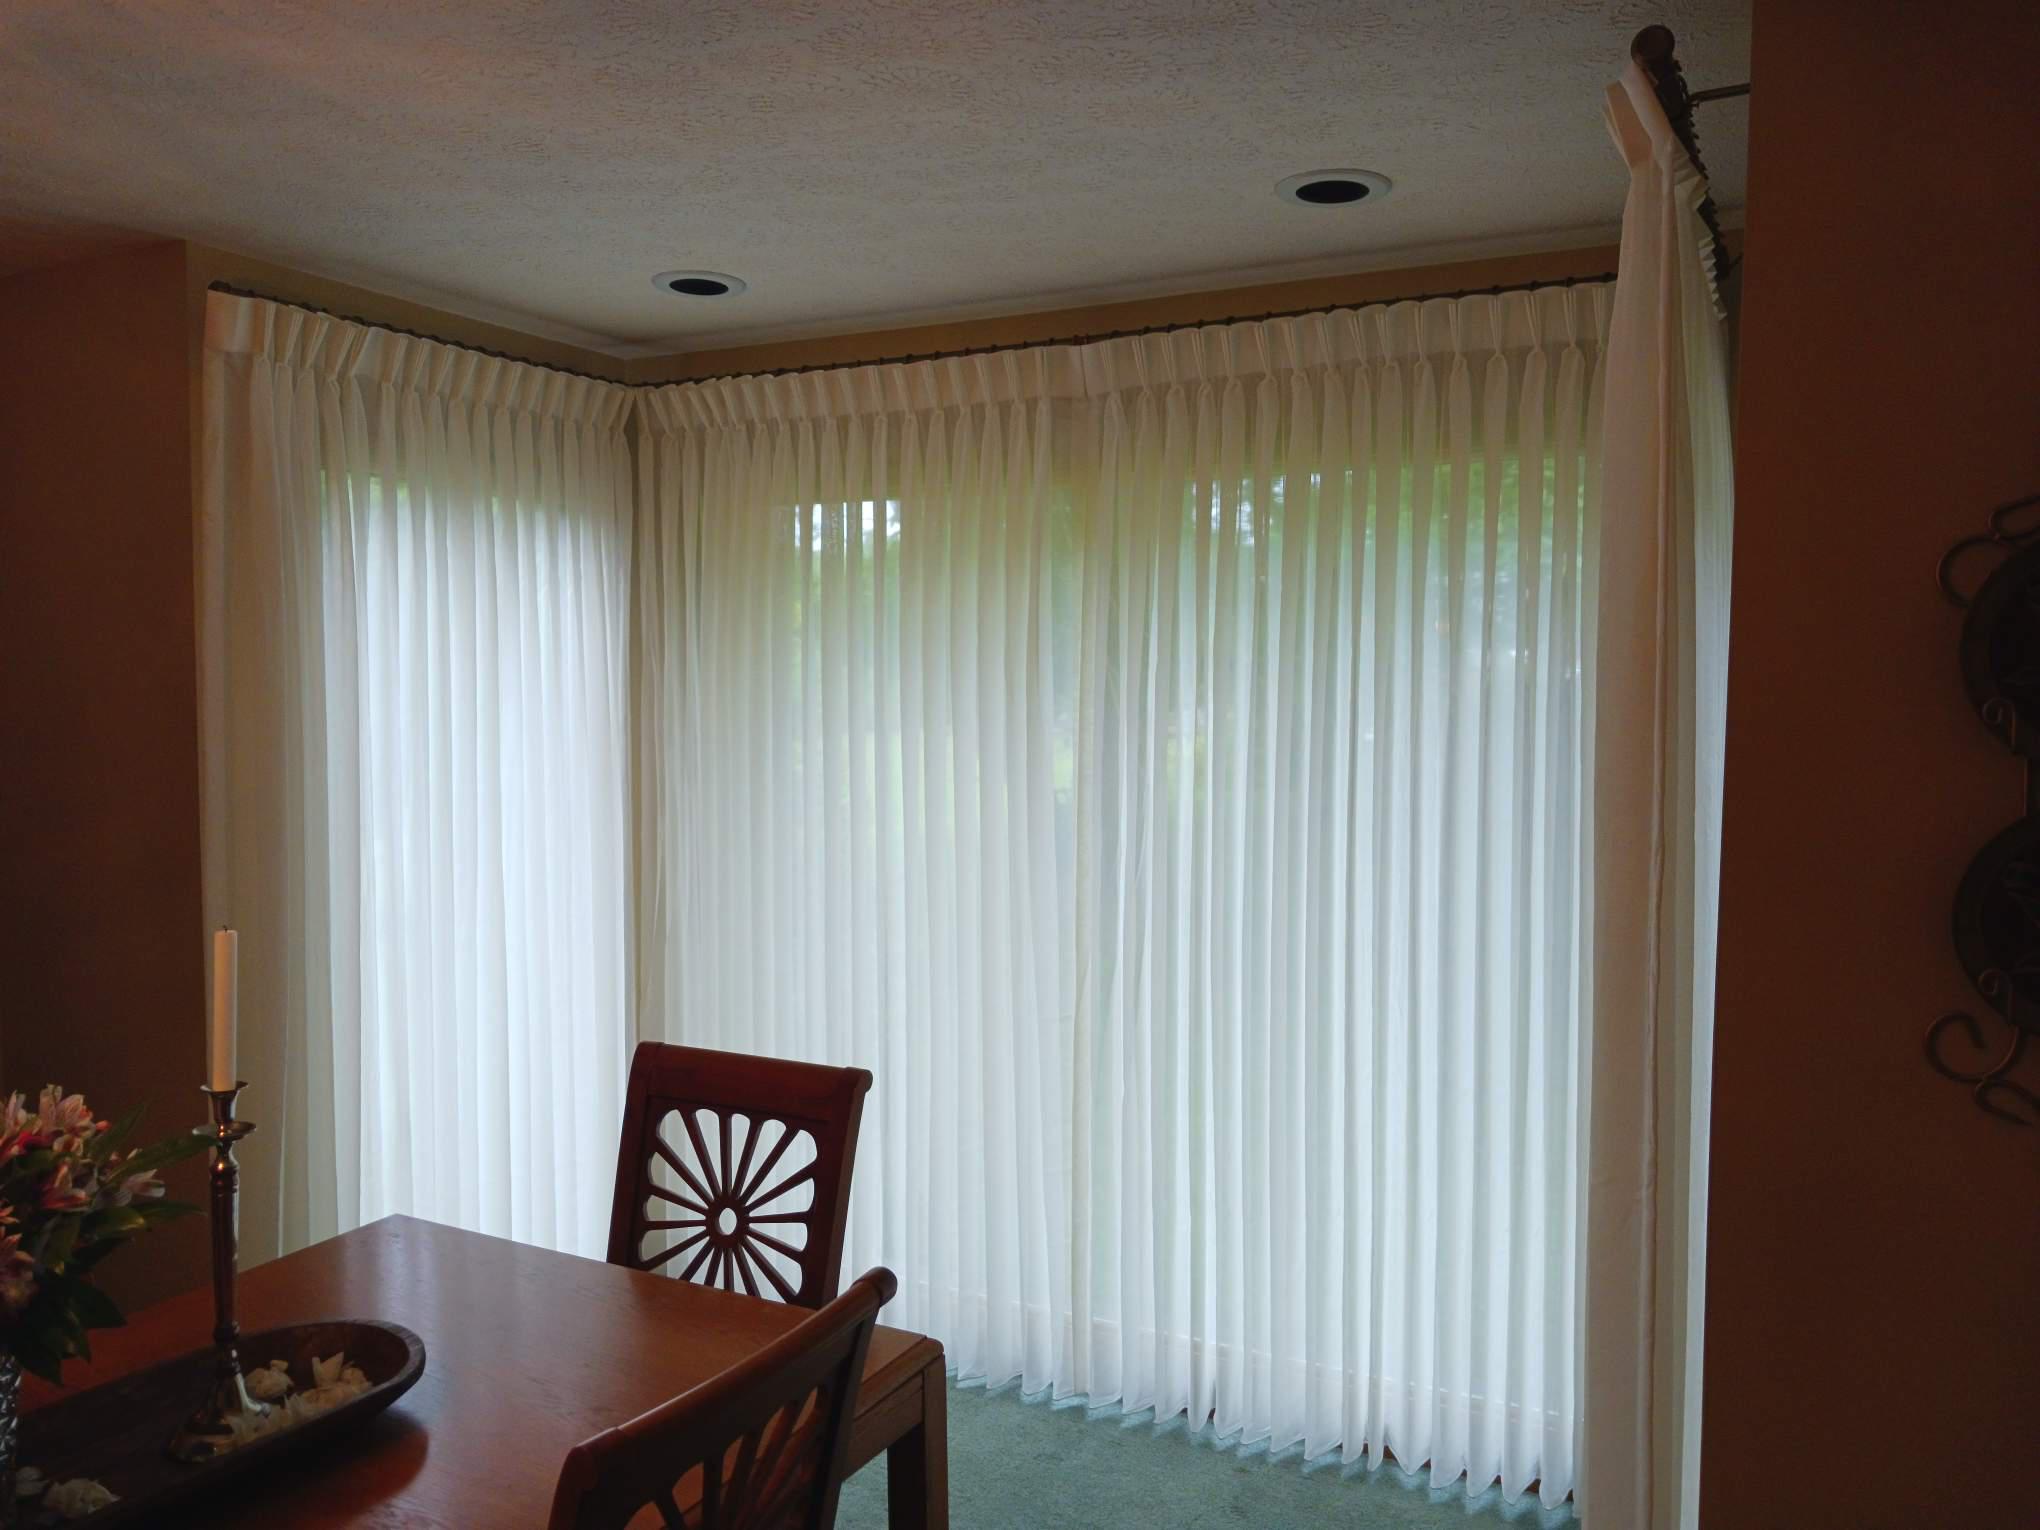 Retain outward visibility while diffusing light with our gorgeous collection of Sheer Drapes in Knox Budget Blinds of Knoxville & Maryville Knoxville (865)588-3377